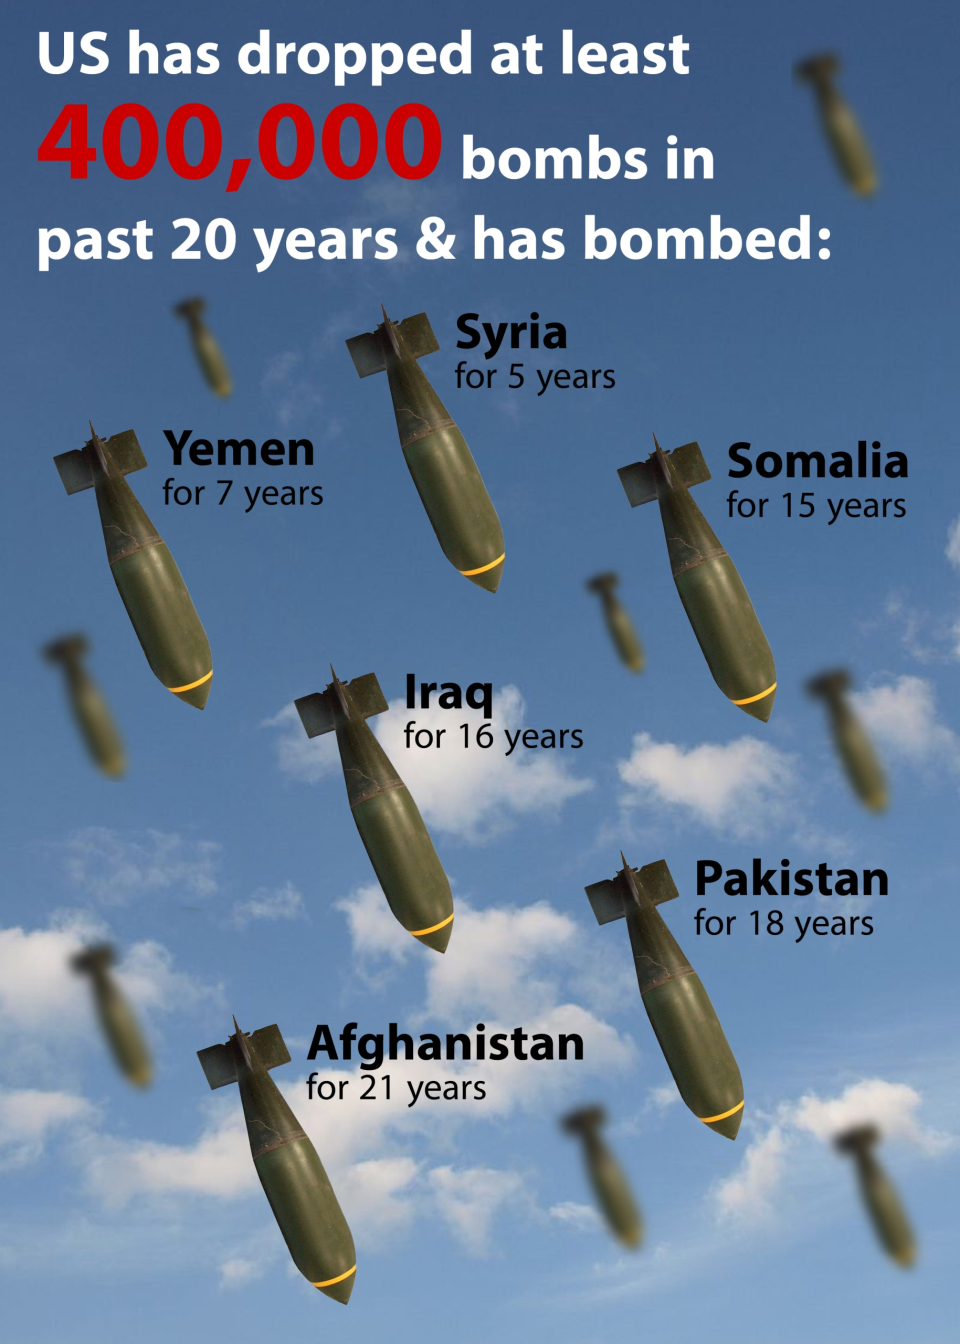 US has dropped at least 400,000 bombs in past 20 years & has bombed: